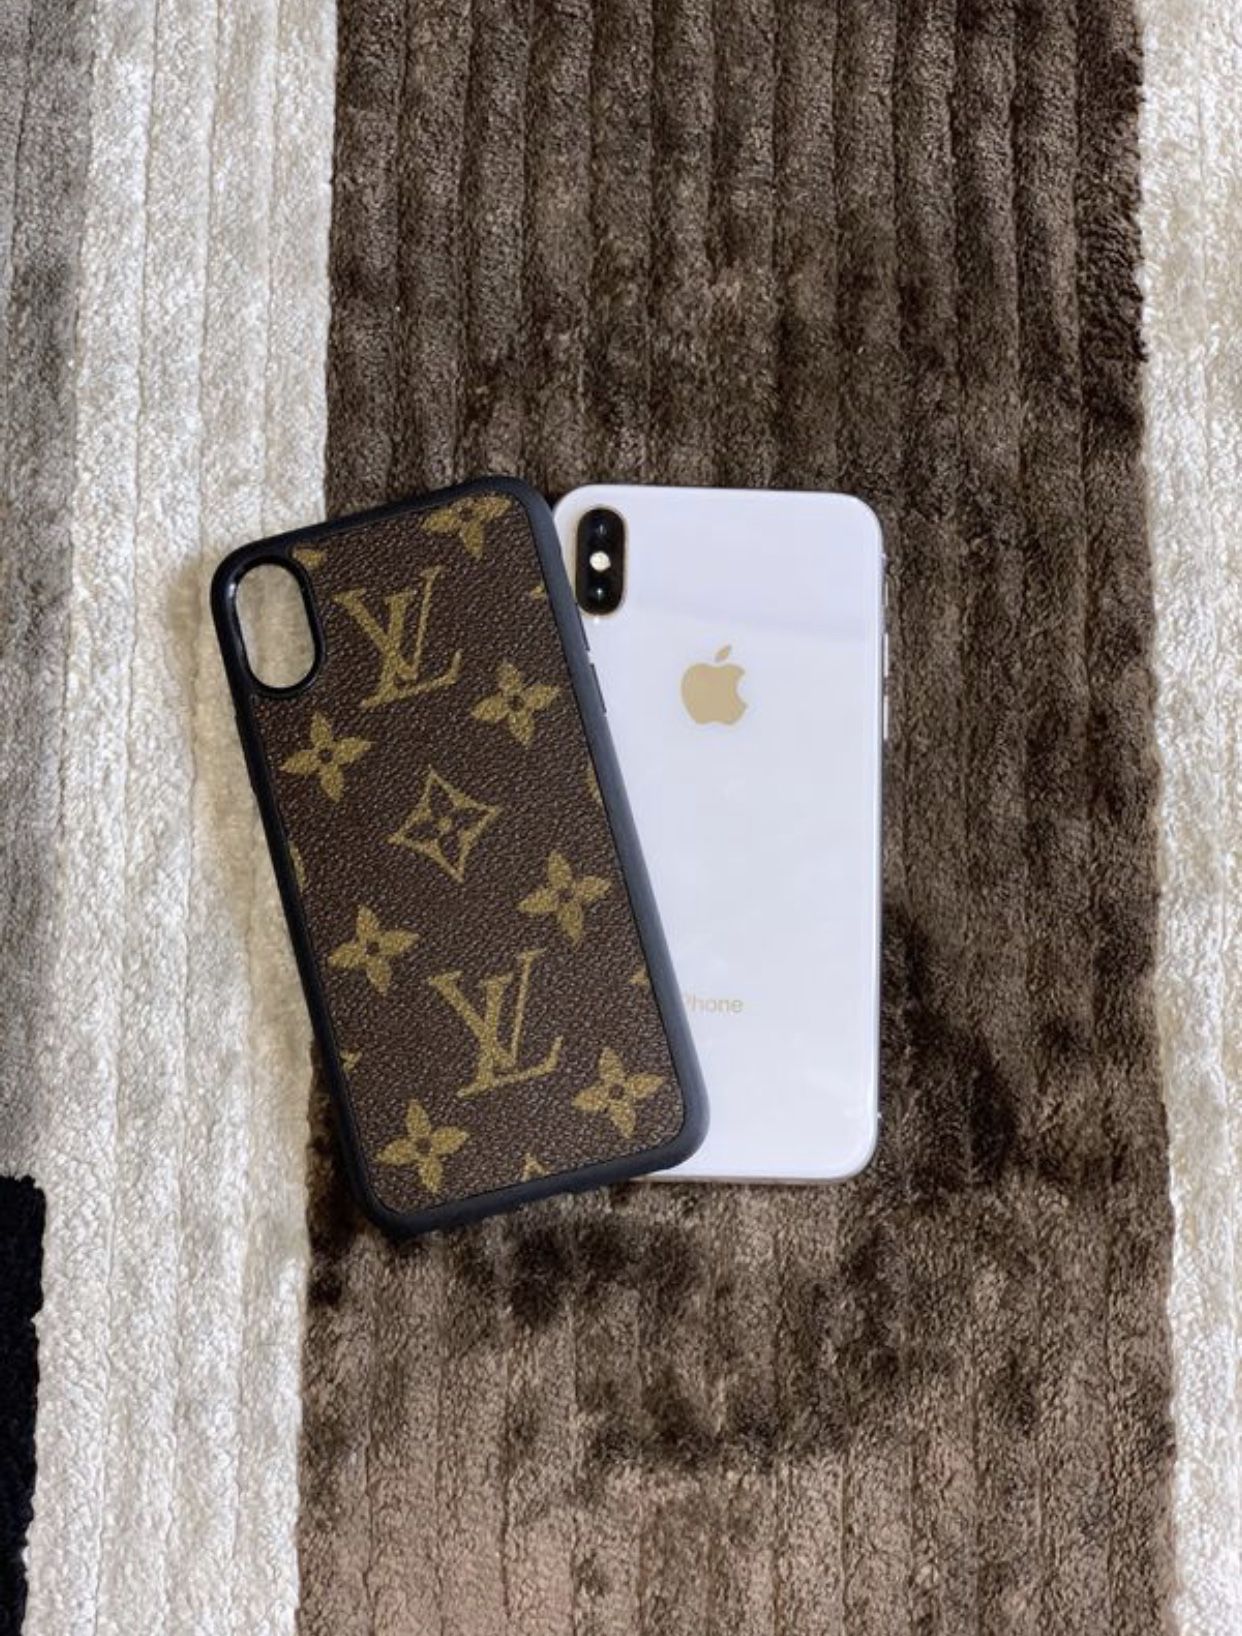 Louis Vuitton case for iPhone 10 for Sale in Las Vegas, NV - OfferUp